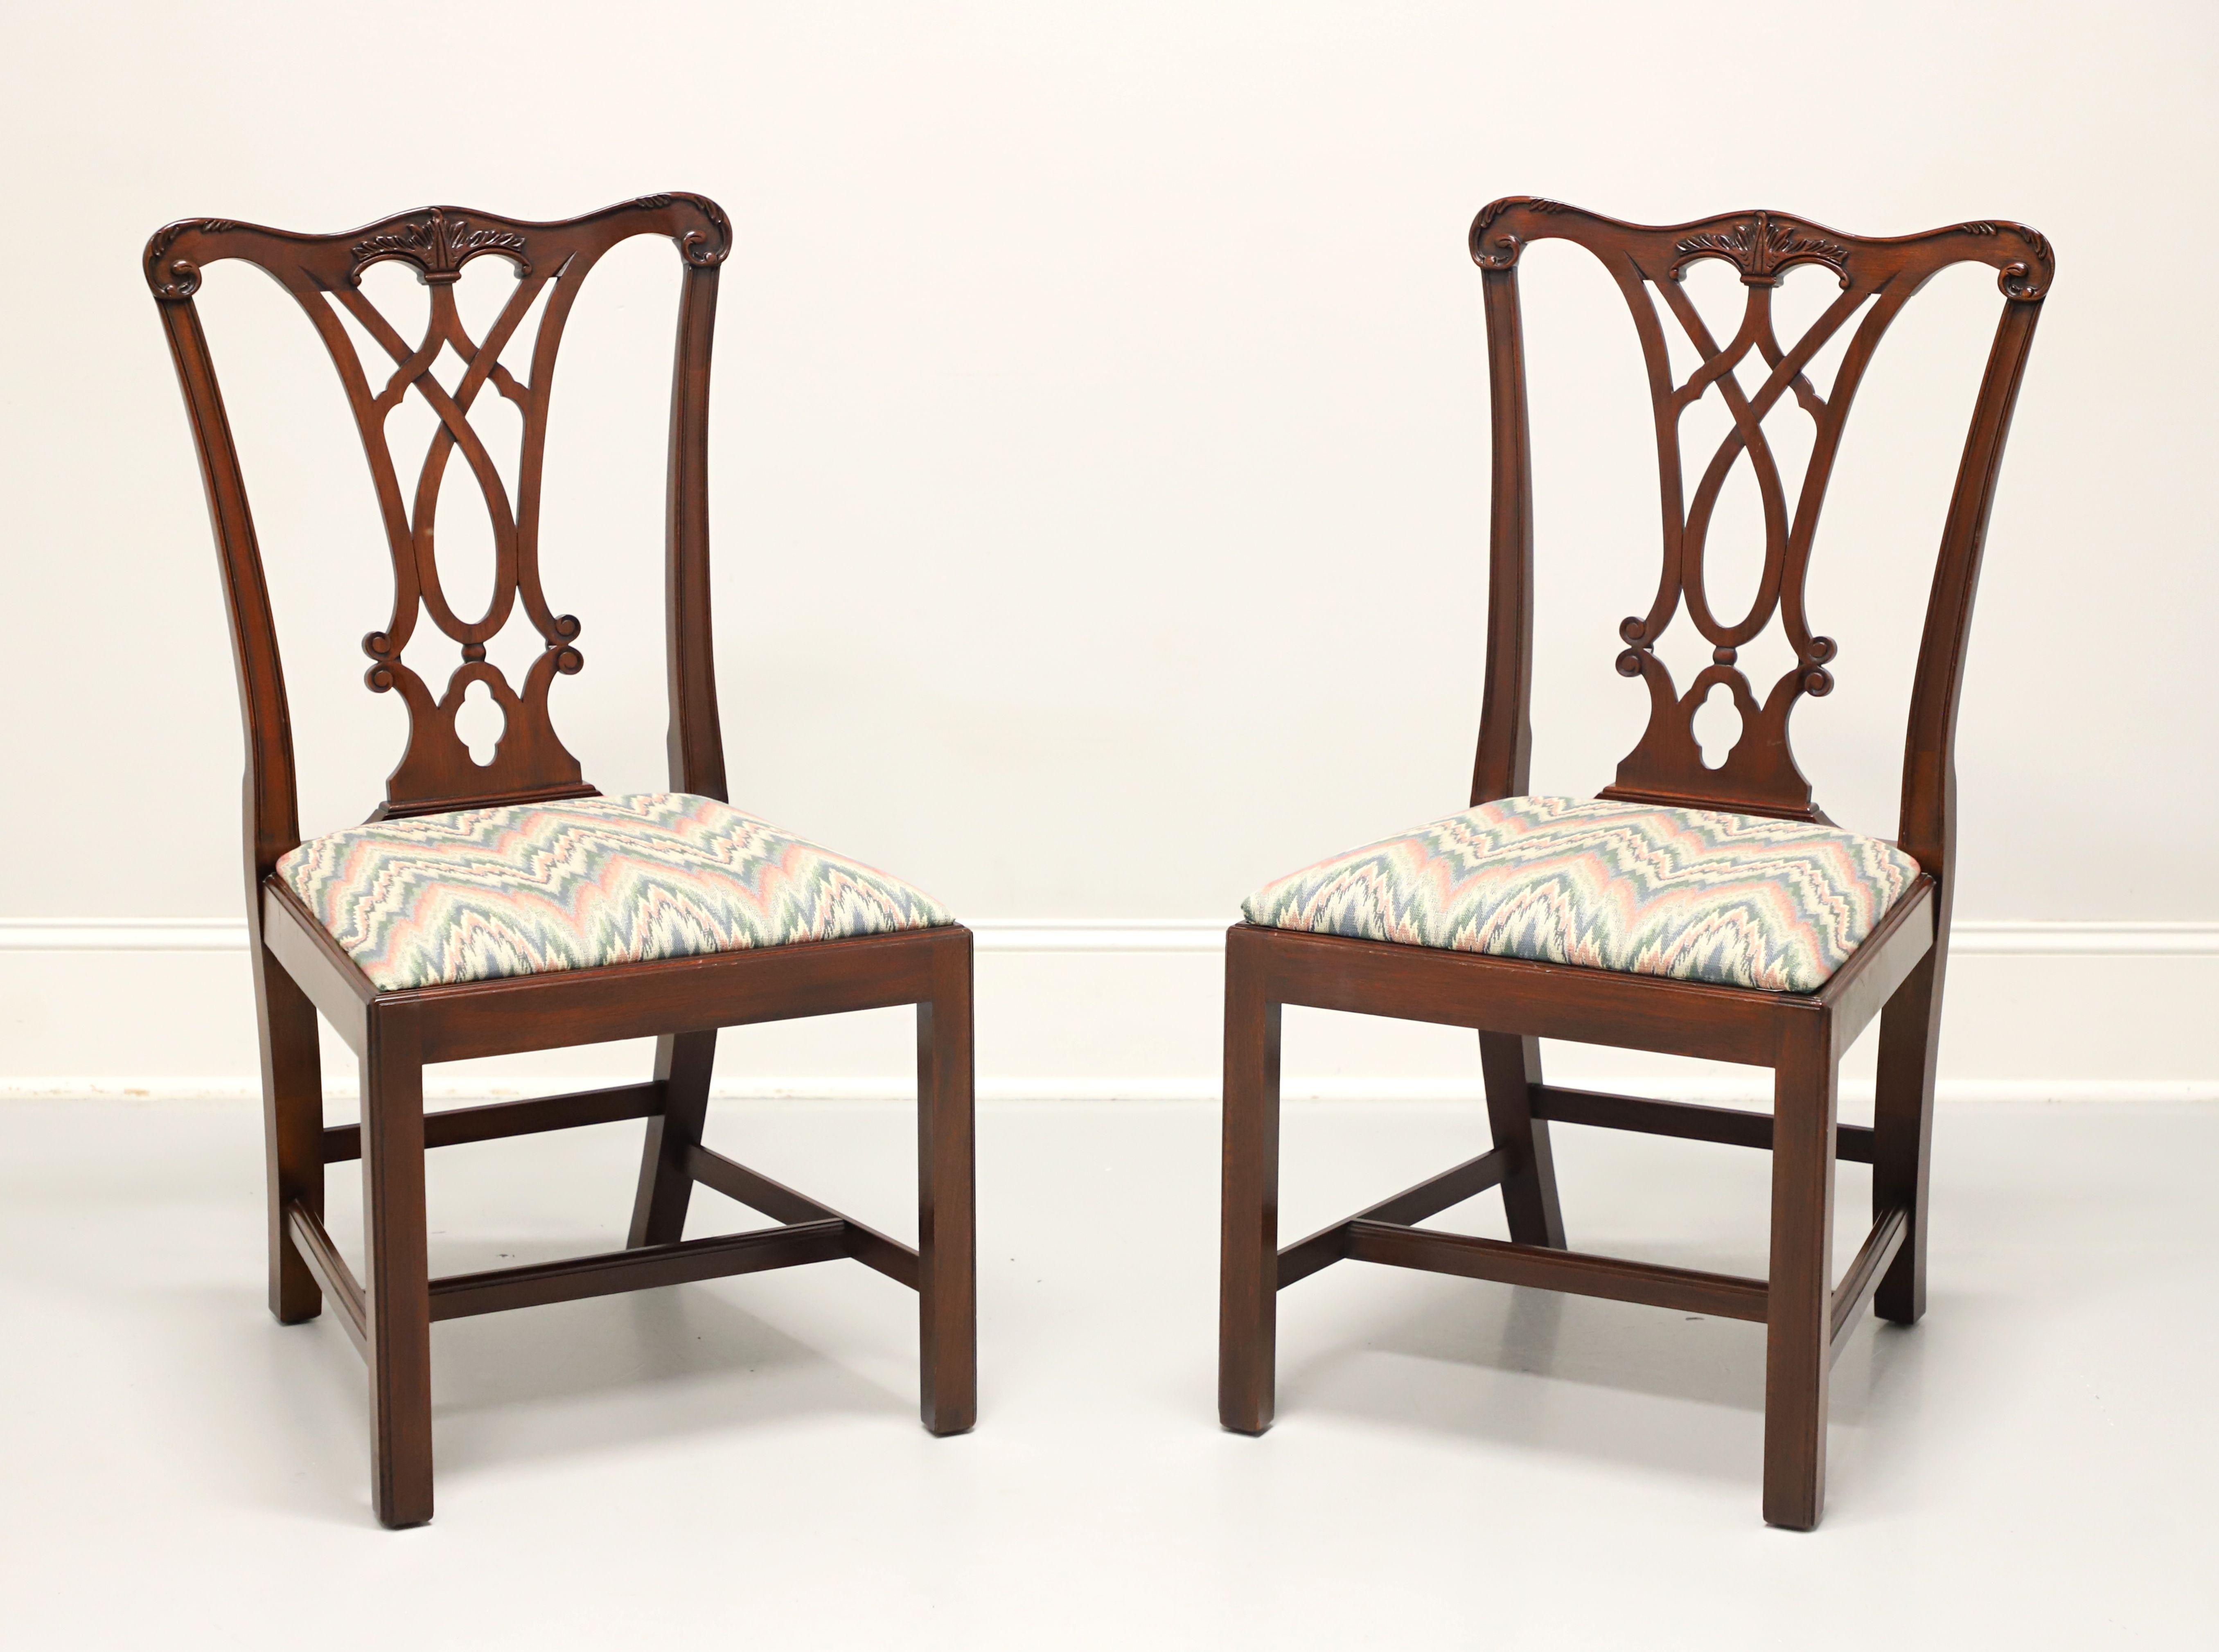 HENKEL HARRIS 107S 29 Mahogany Chippendale Dining Side Chairs - Pair A 6